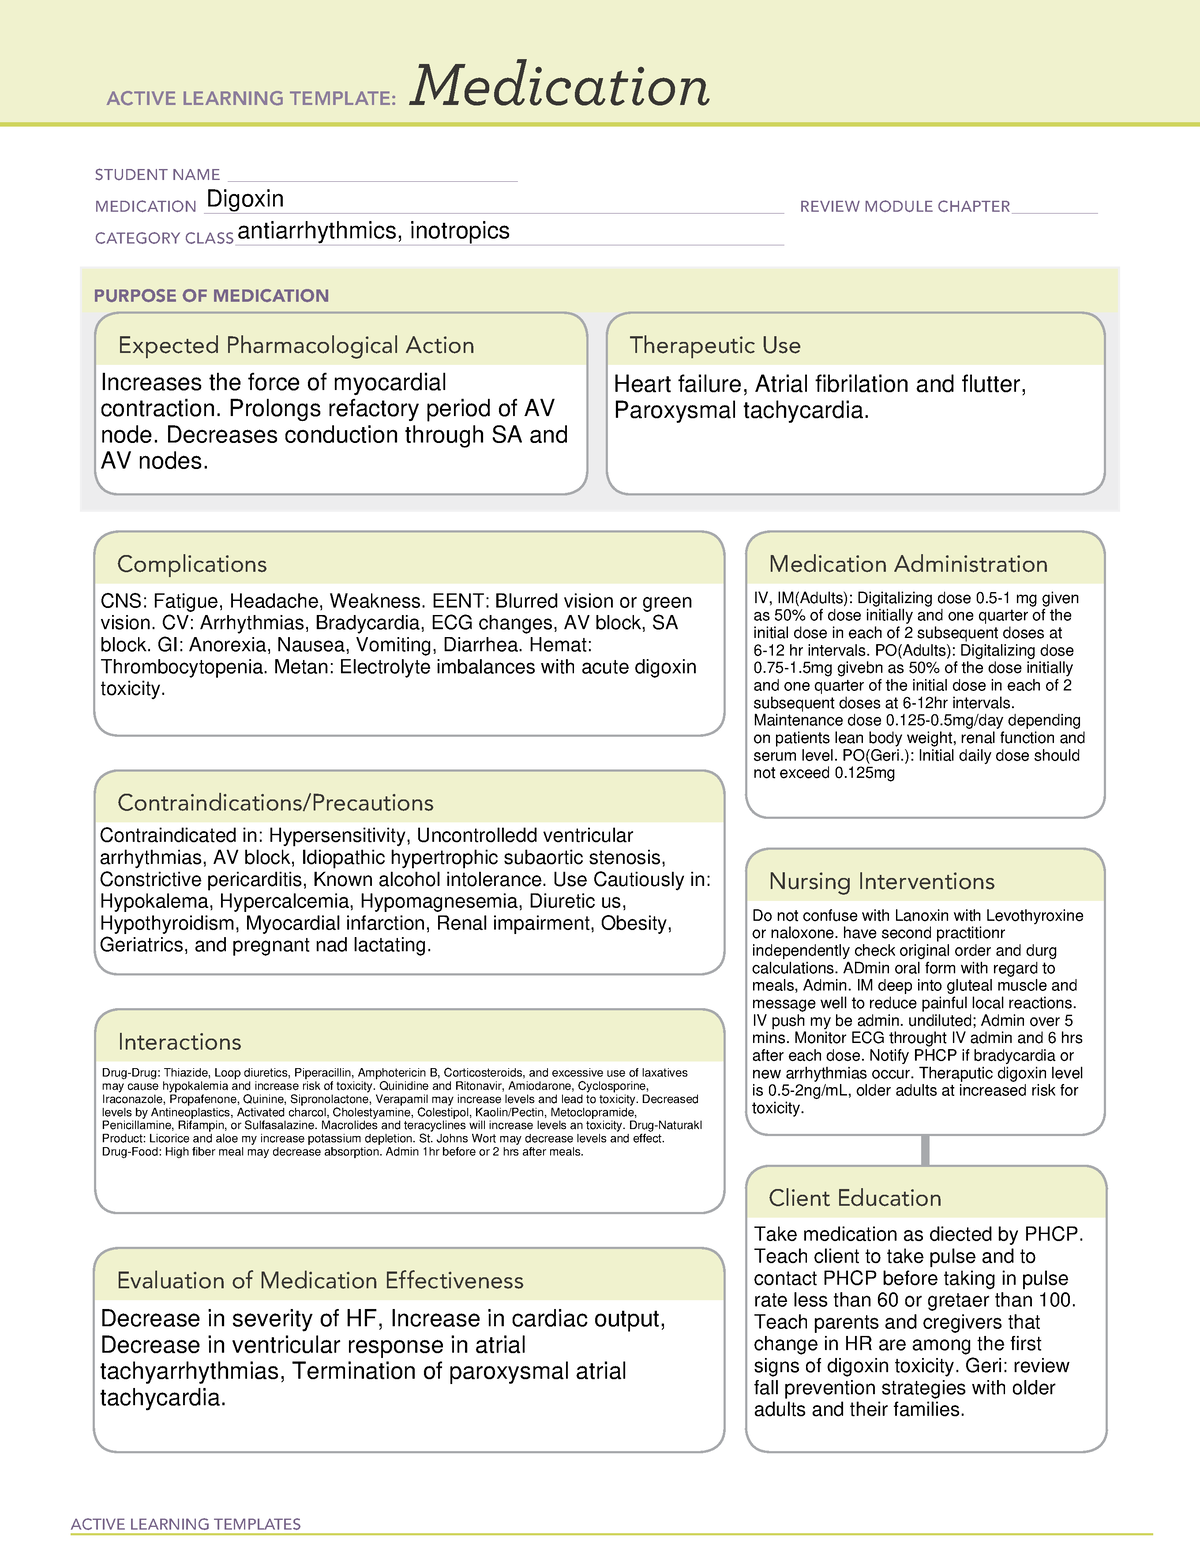 Ati Active Learning Template Medication Digoxin